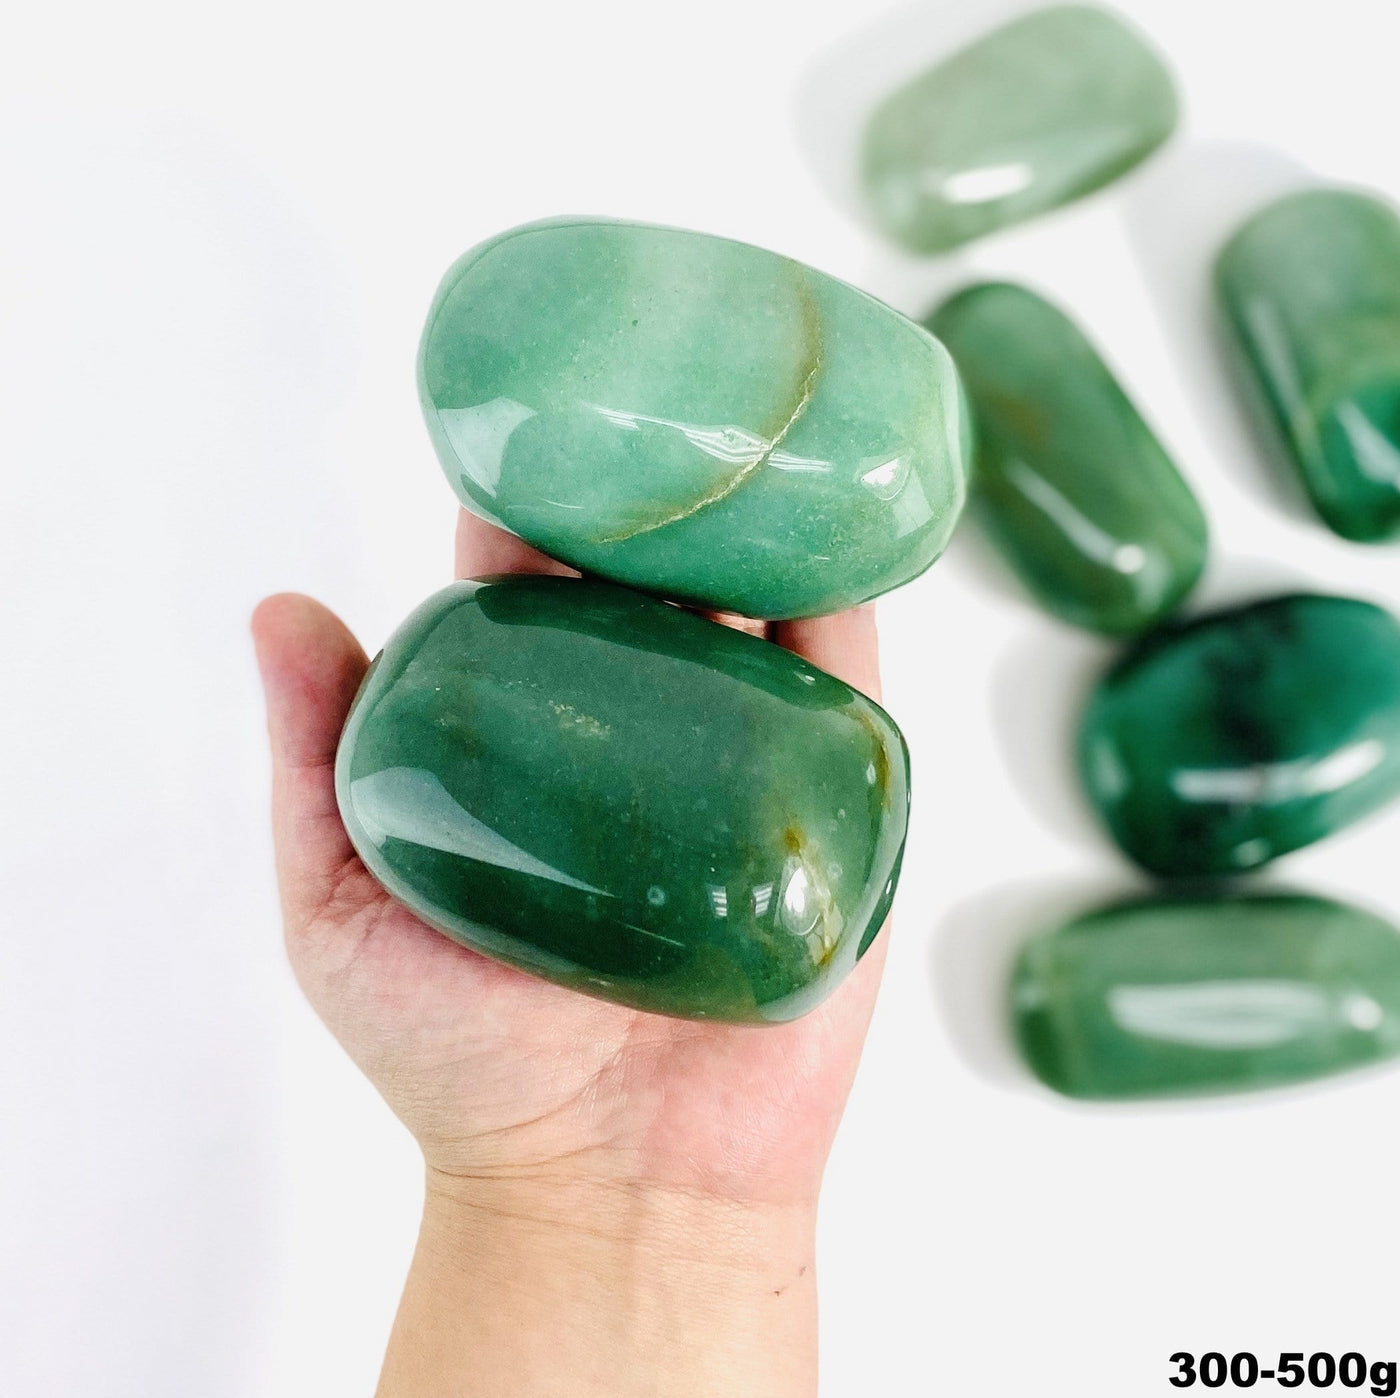 Green Aventurine Large Tumbled Stones - 2 in a hand